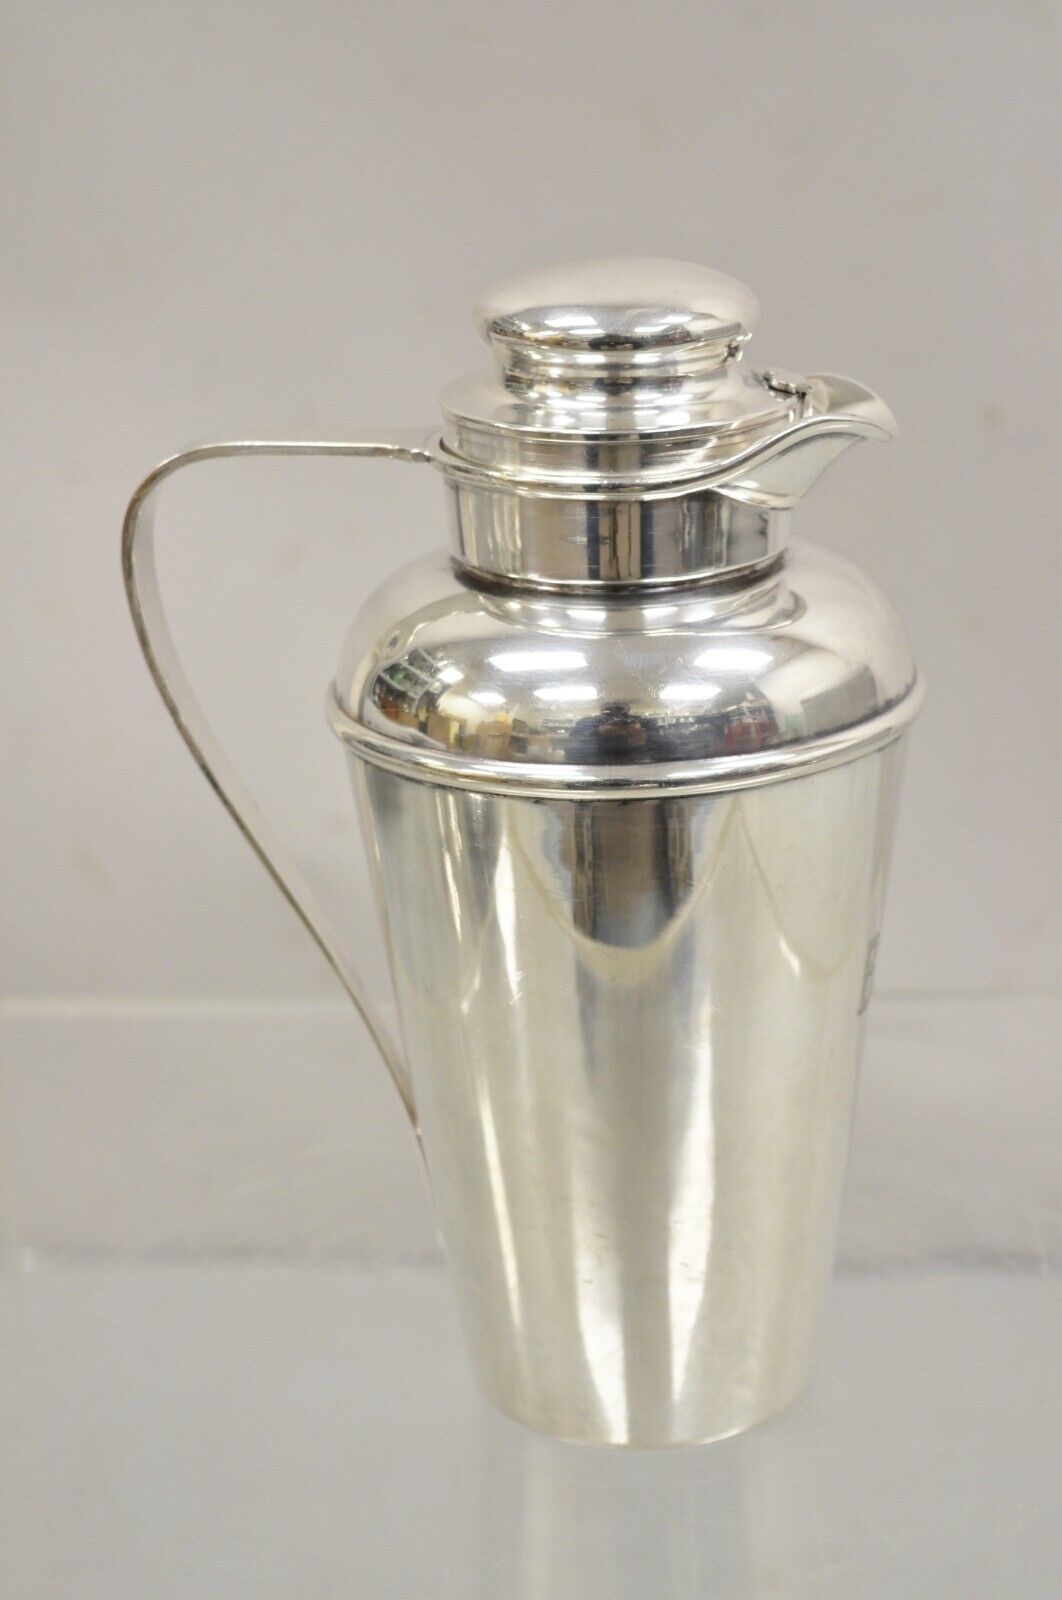 Antique Gorham 01219 Art Deco Silver Plated Cocktail Martini Shaker Pitcher